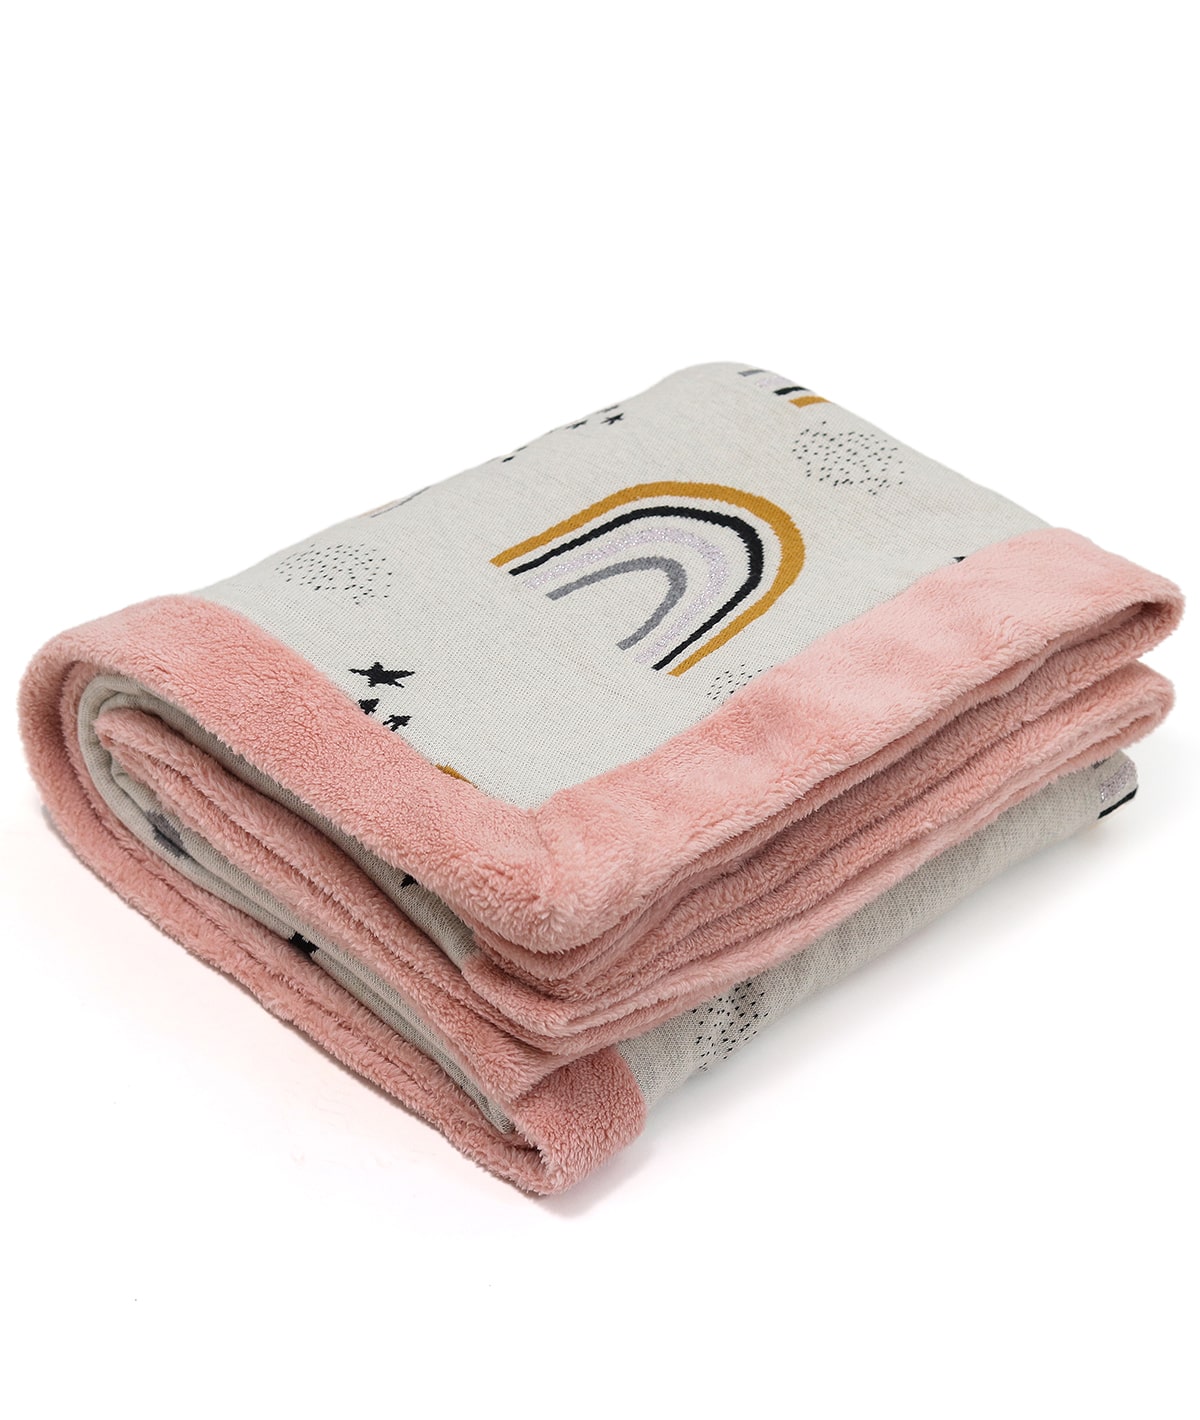 Dance with Rainbows - Natural, Light Pink & Multi Color Cotton Knitted Blanket With Faux Fur Back For Kids